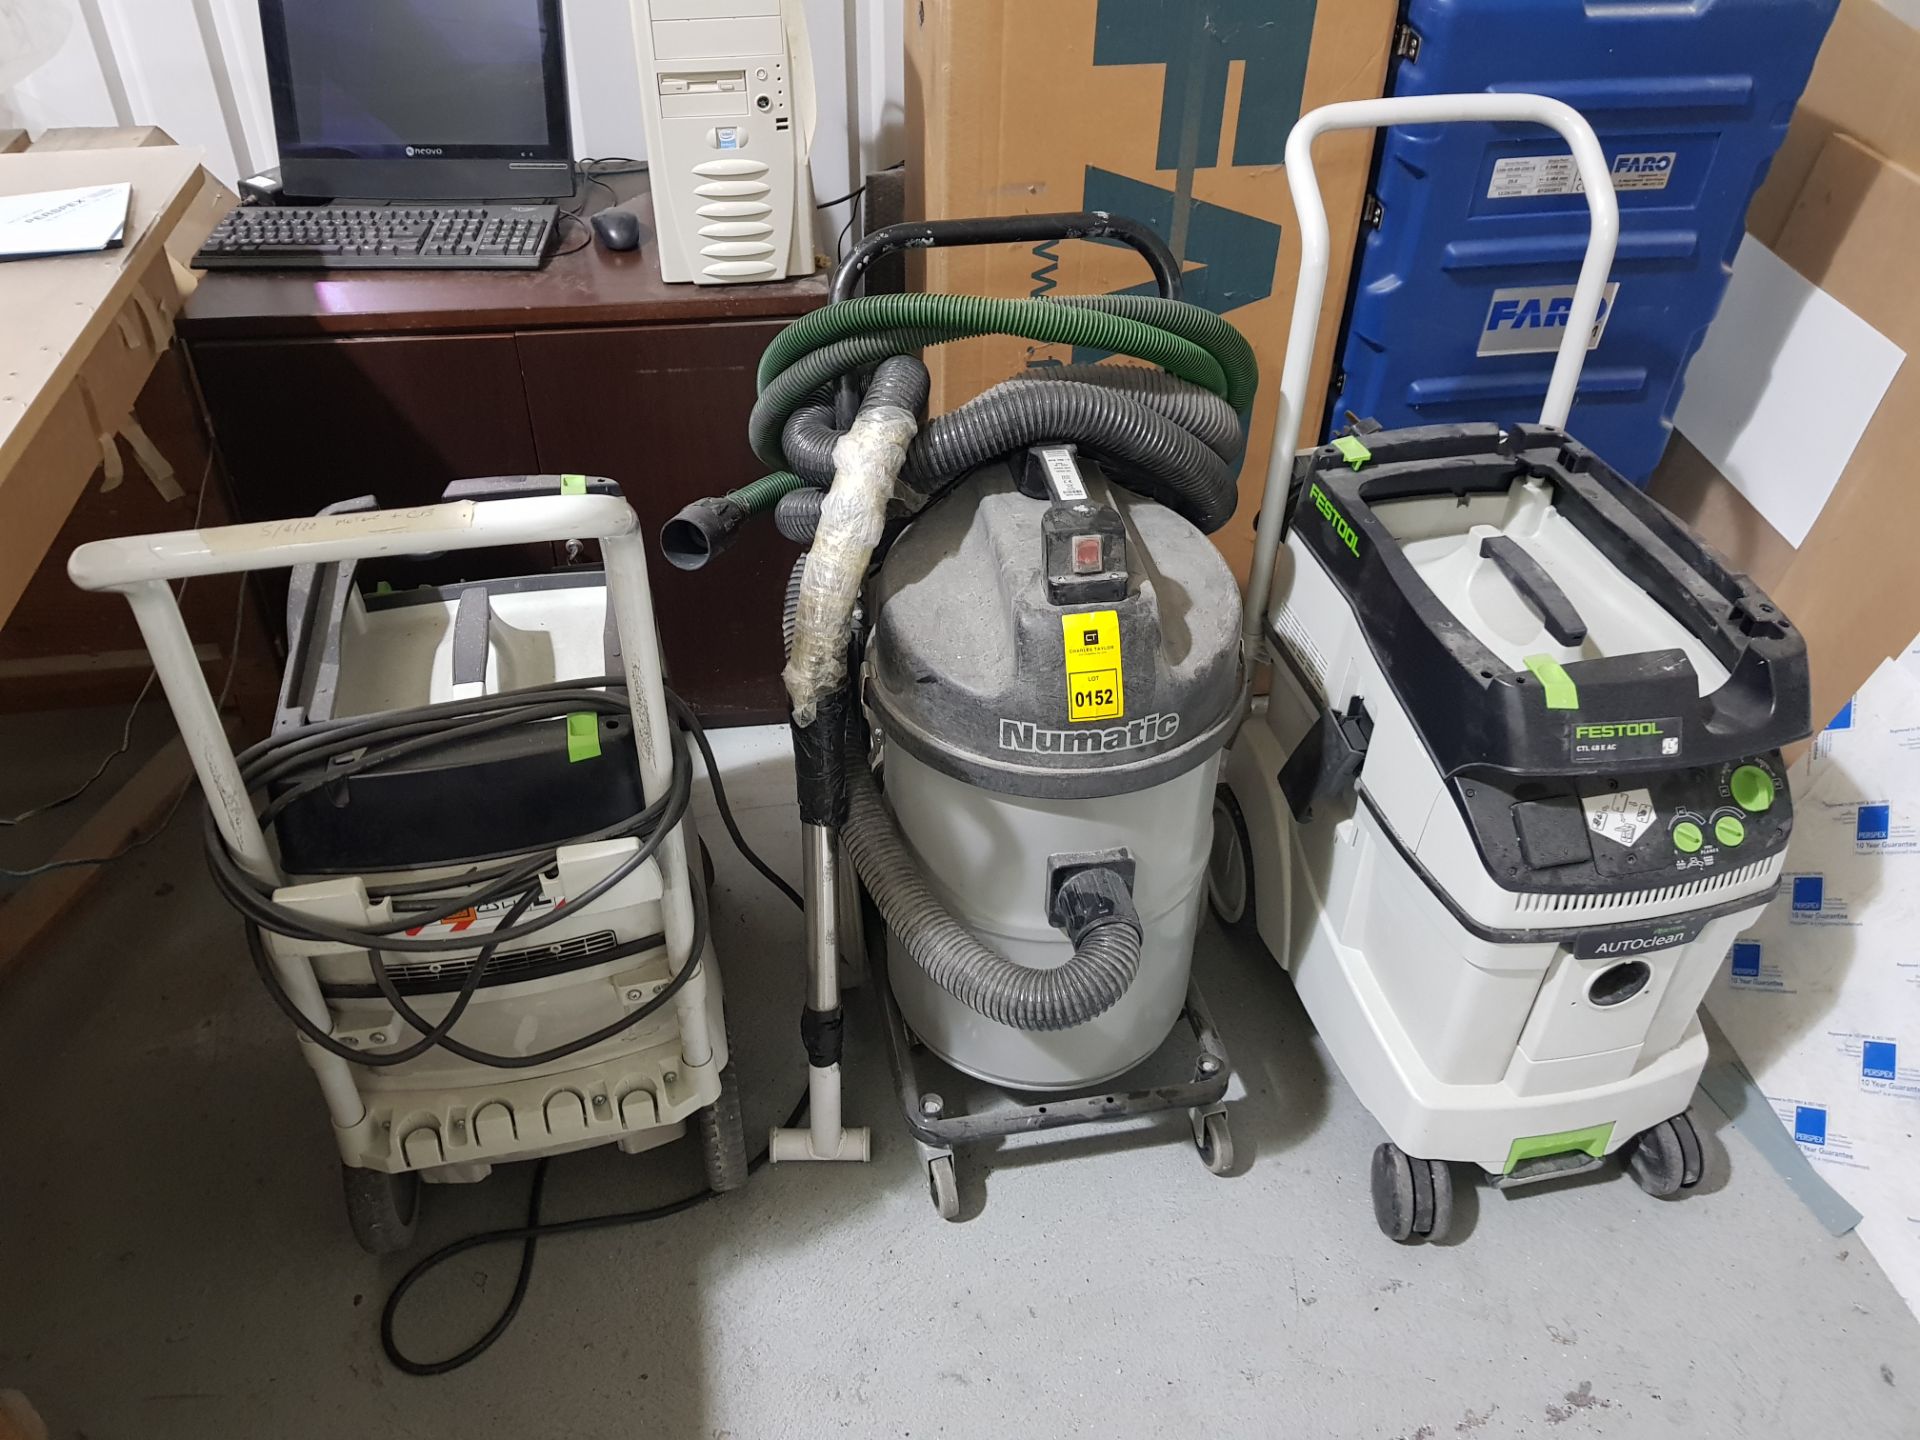 2 X FESTOOL CTL 48 EAC AUTO CLEAN MOBILE DUST EXTRACTOR & NUMATIC NTD 750 2 CYLINDER INDUSTRIAL